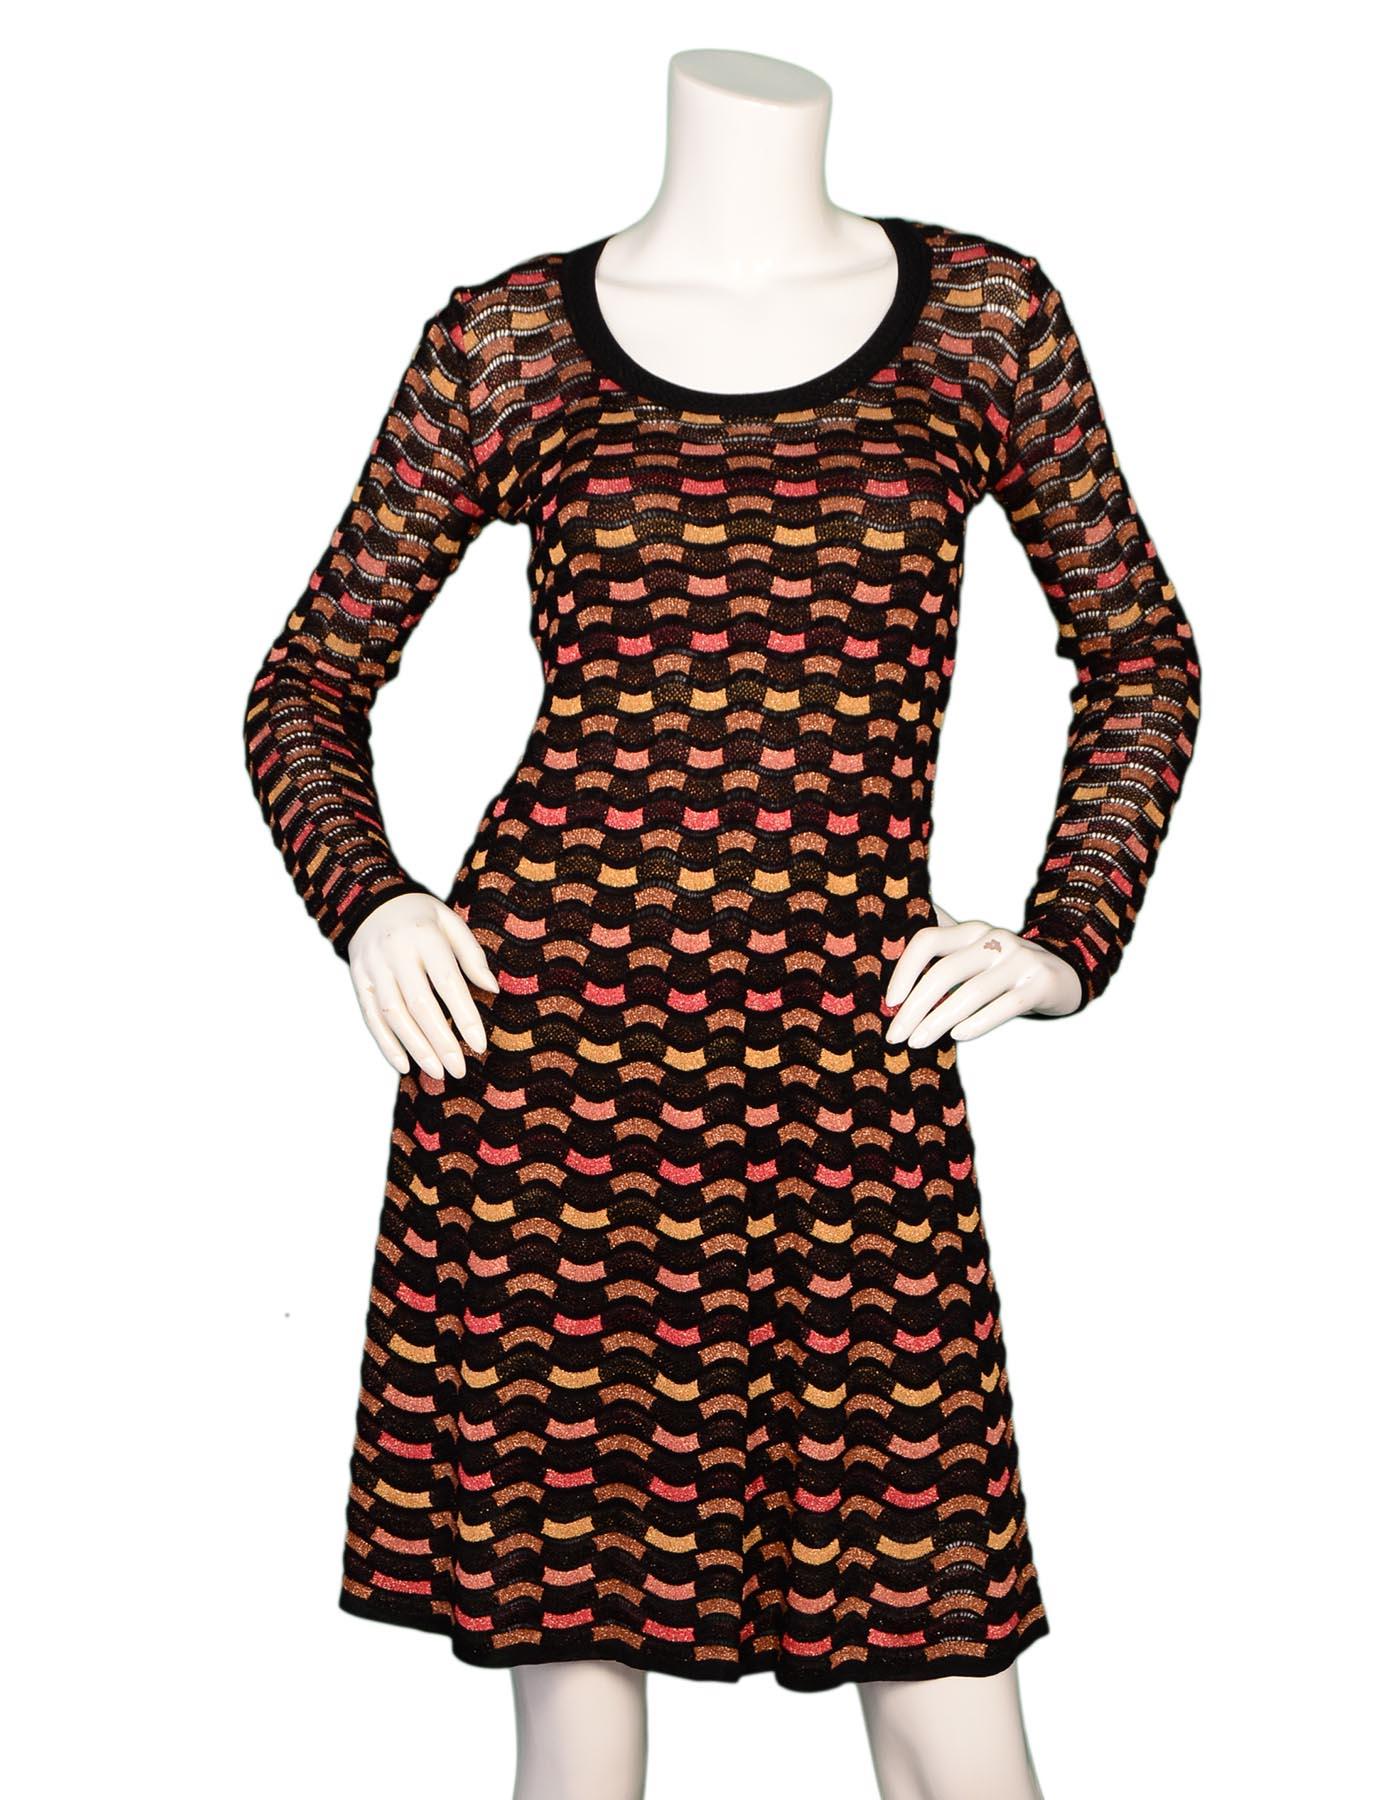 Missoni NWT Black/Multi-Color Checkered Longsleeve Knit Dress W/ Slip Sz 40

Made In: China
Color: Black, multicolor
Materials: 61% viscose, 20% polyamide, 16% cotton, 3% metalized fiber
Lining: 100% polyester slip 
Opening/Closure: Pull